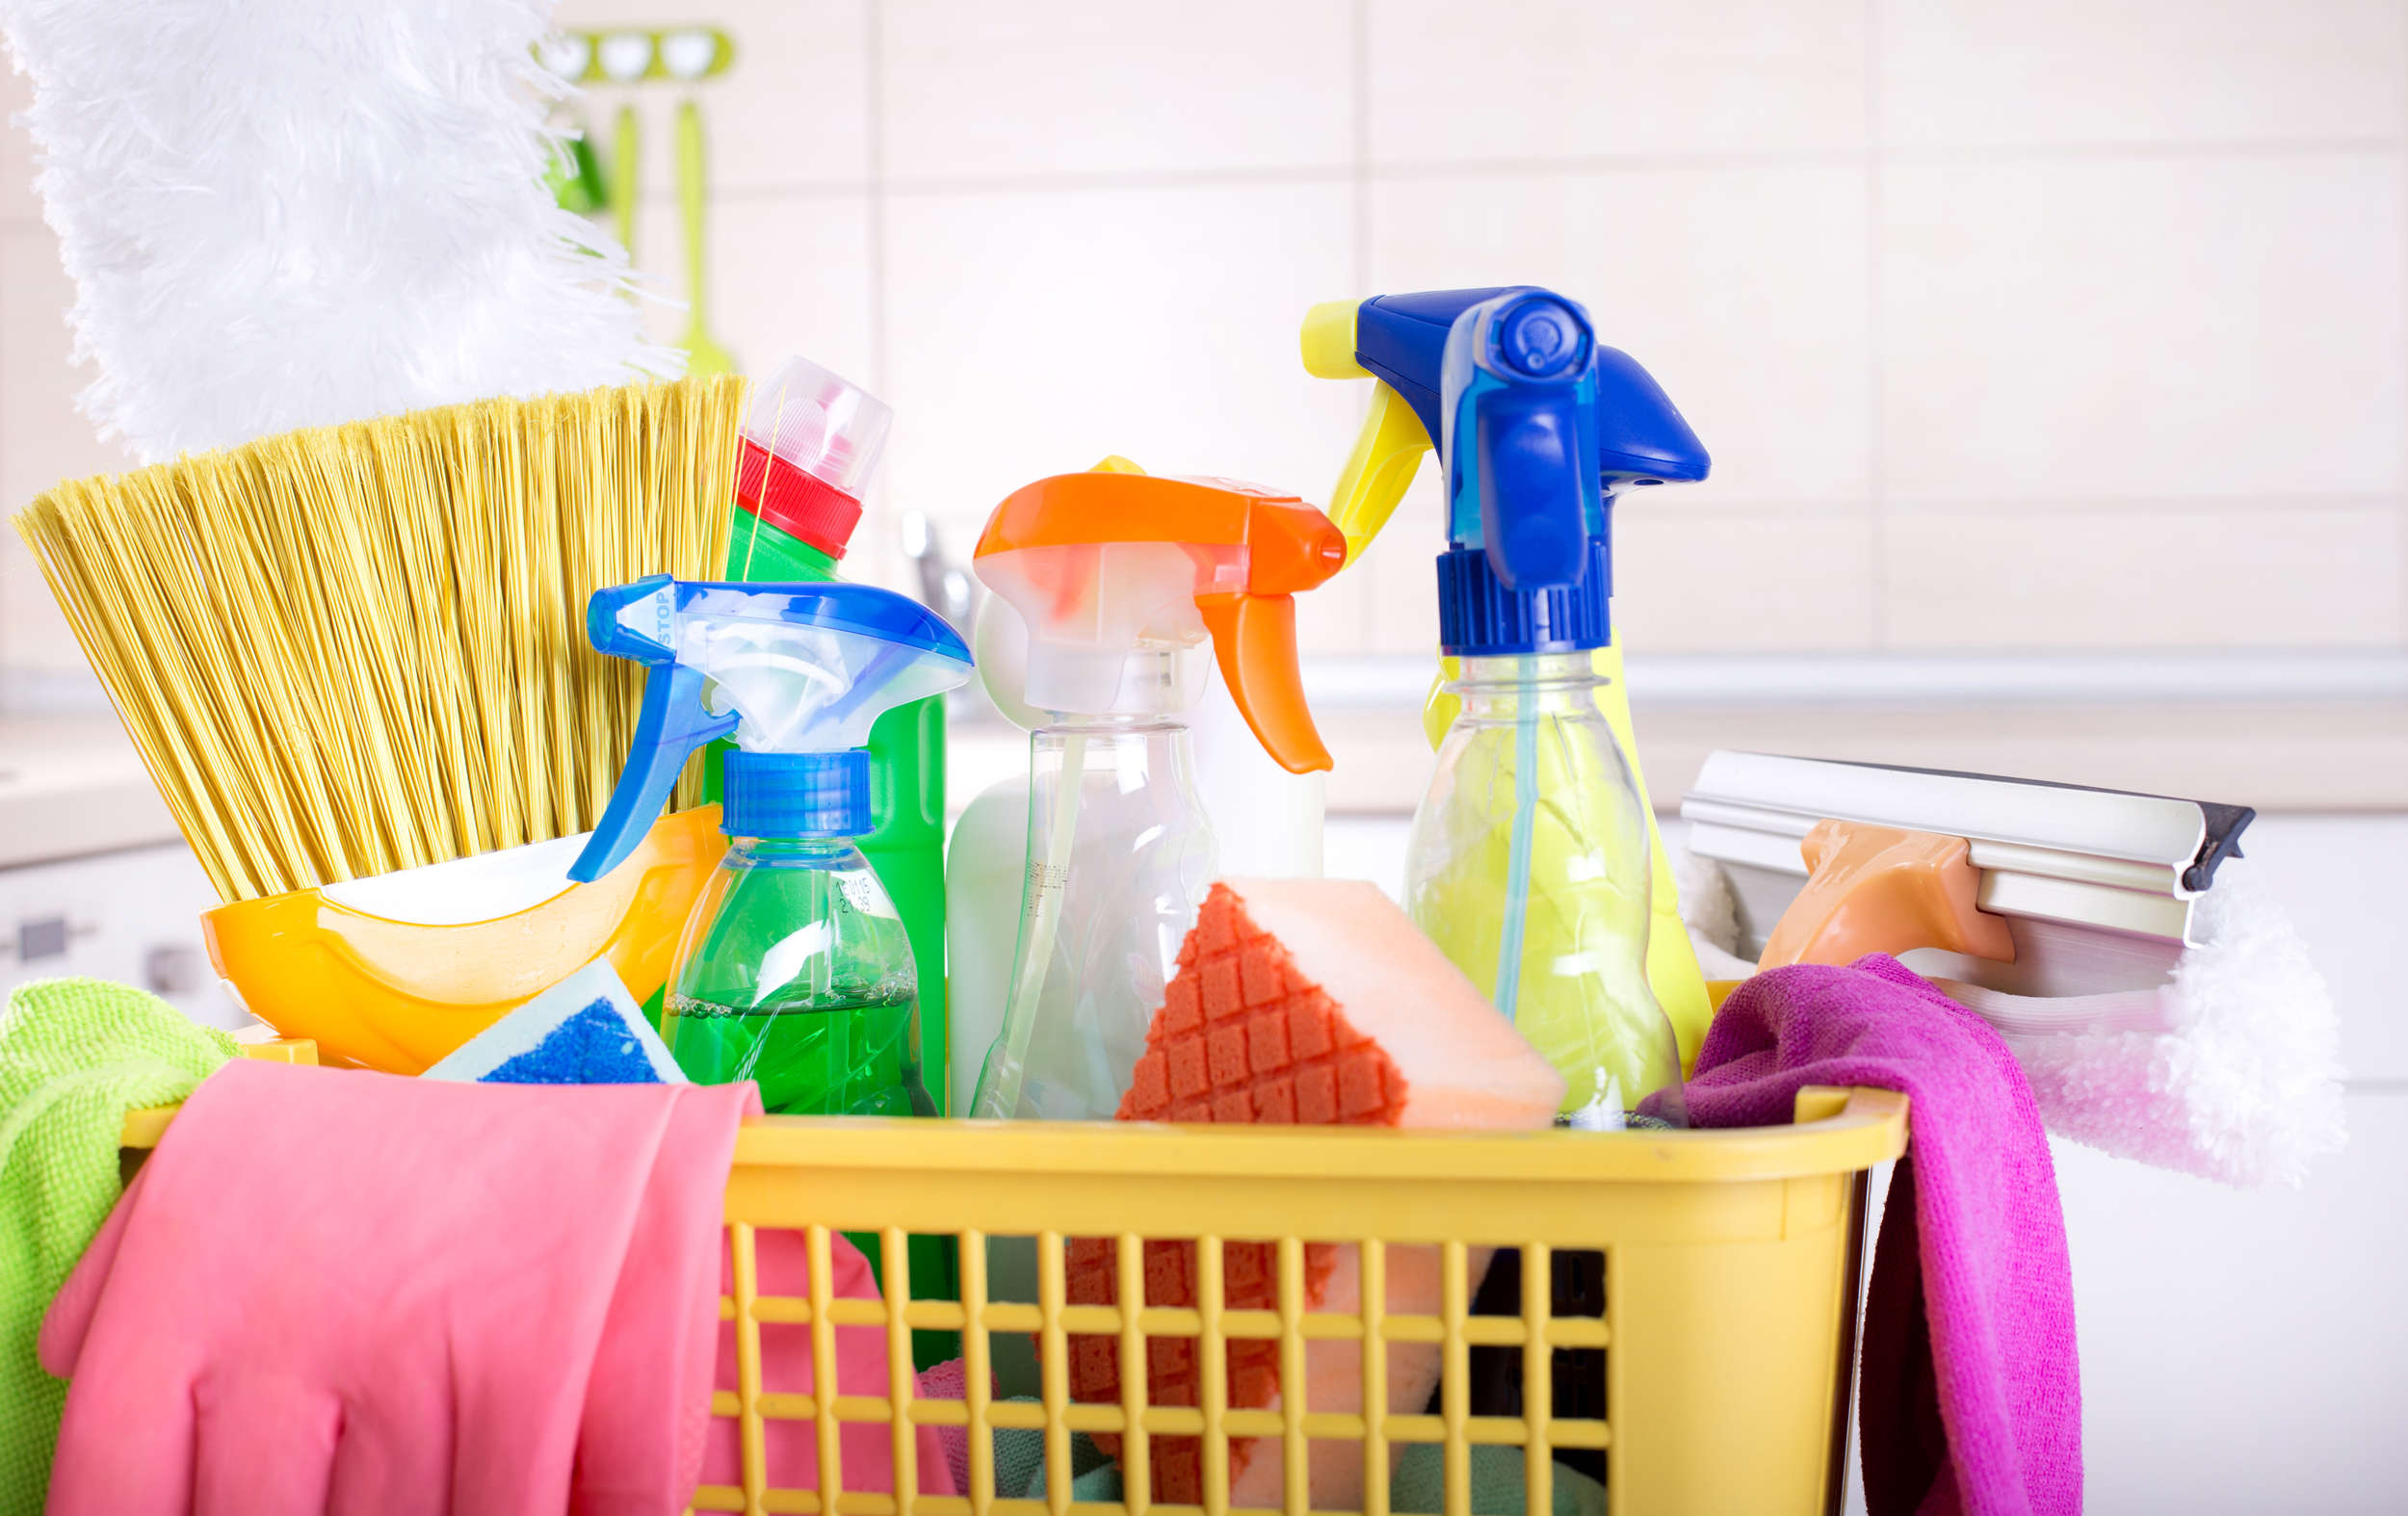 20 Cleaning Pictures  Download Free Images  Stock Photos on Unsplash